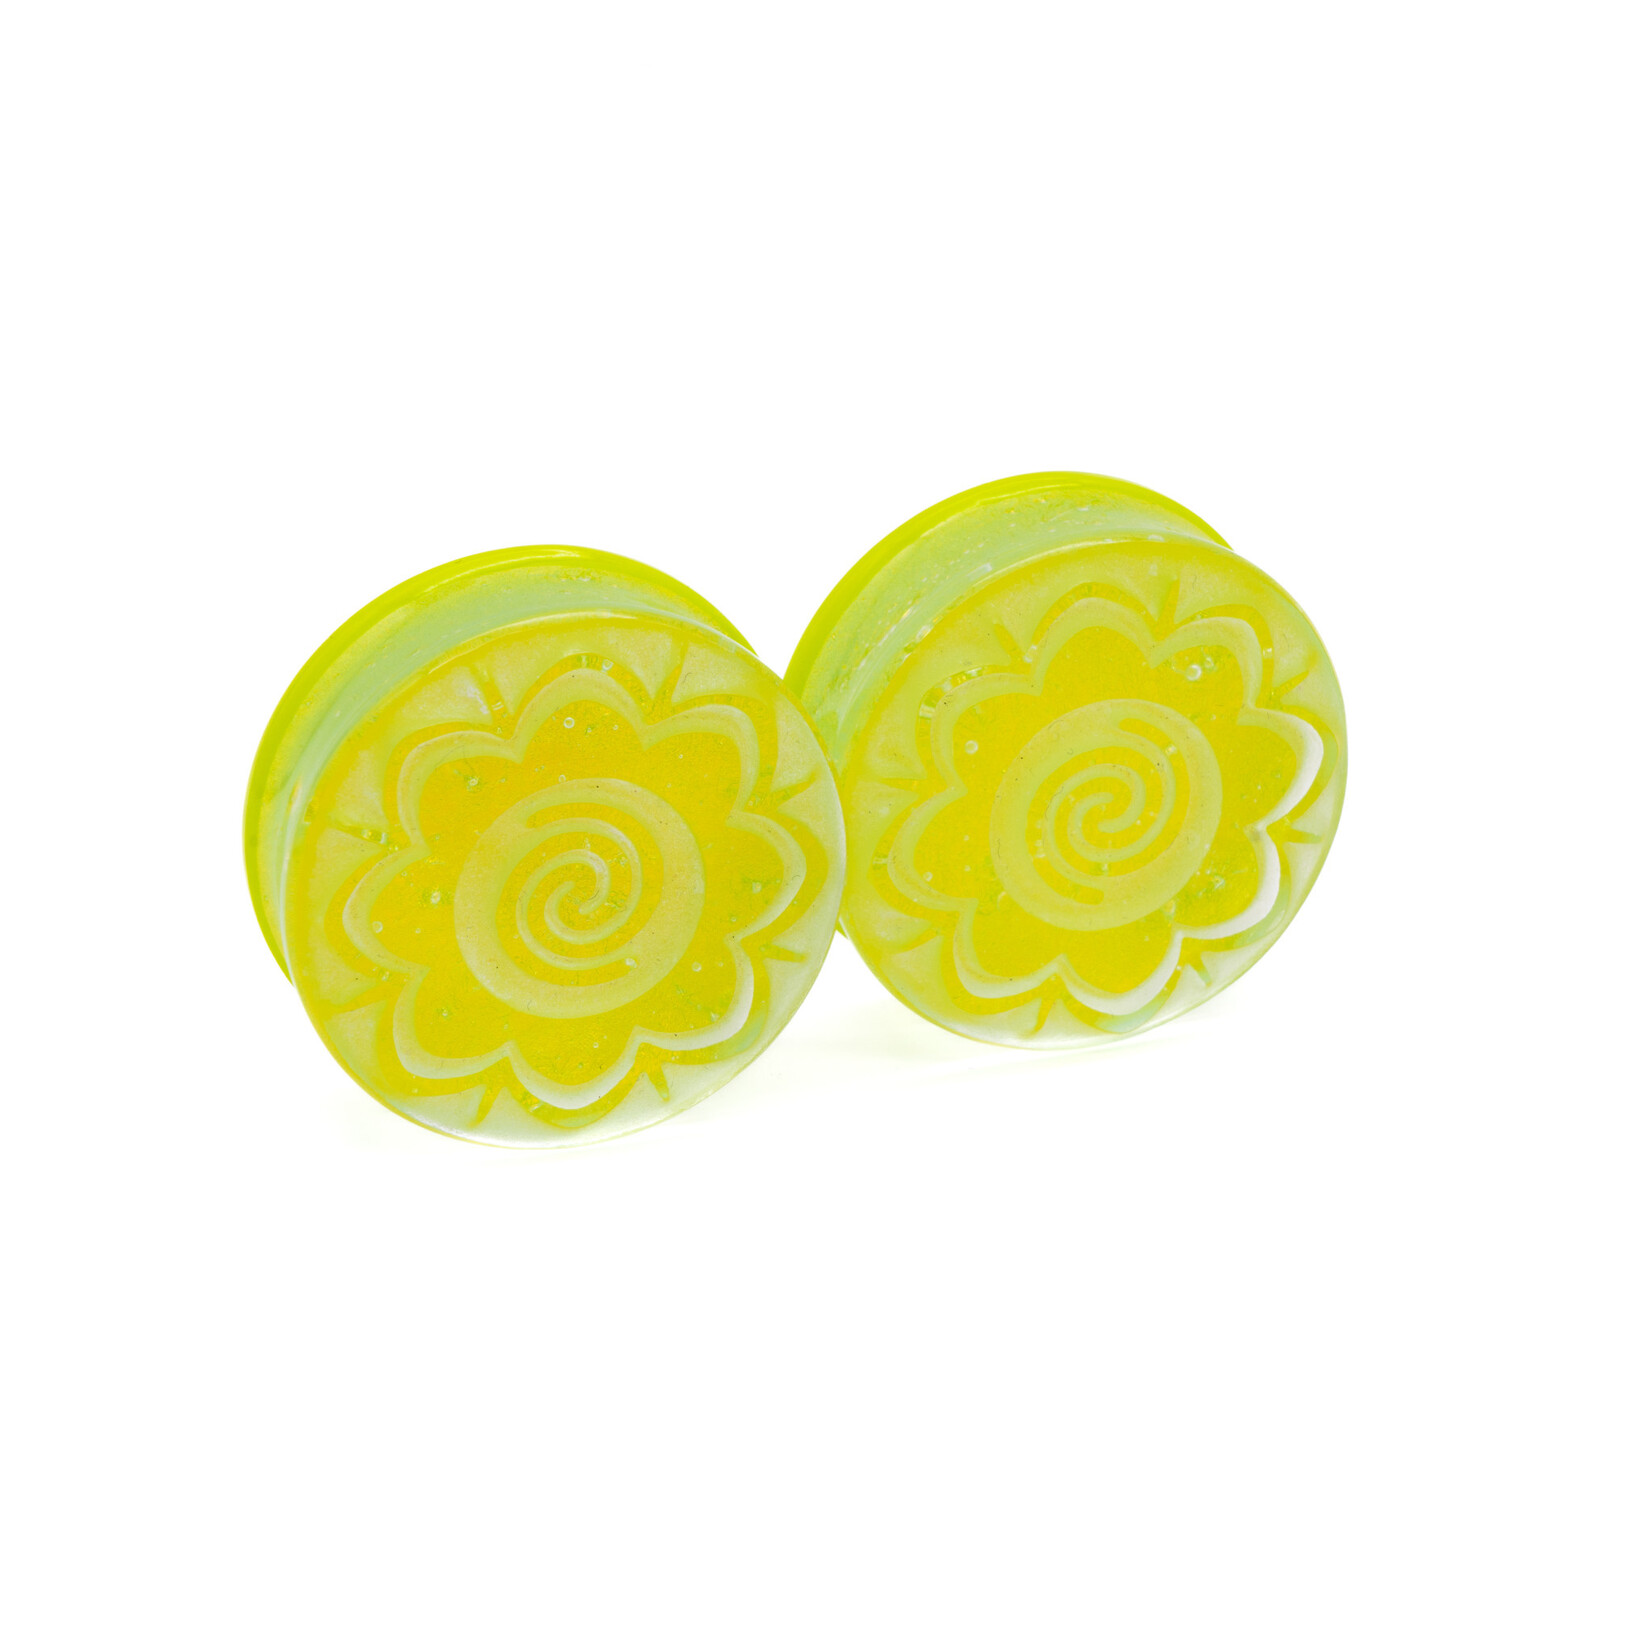 Gorilla Glass Double Flare (DF) Glass Plugs - Brindal Flower (Pair)